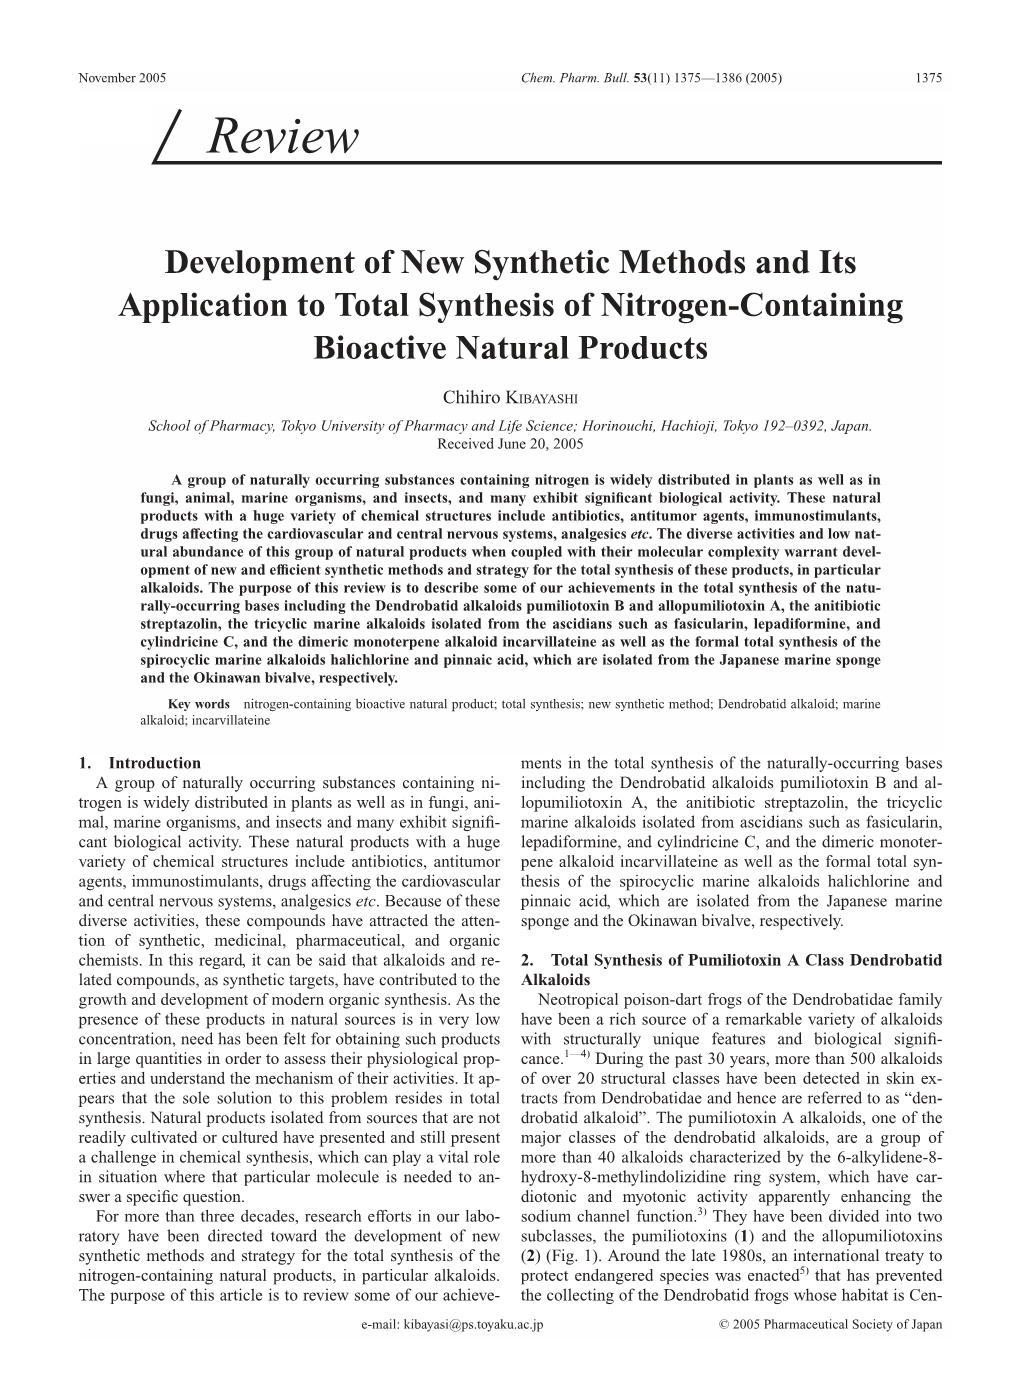 Development of New Synthetic Methods and Its Application to Total Synthesis of Nitrogen-Containing Bioactive Natural Products